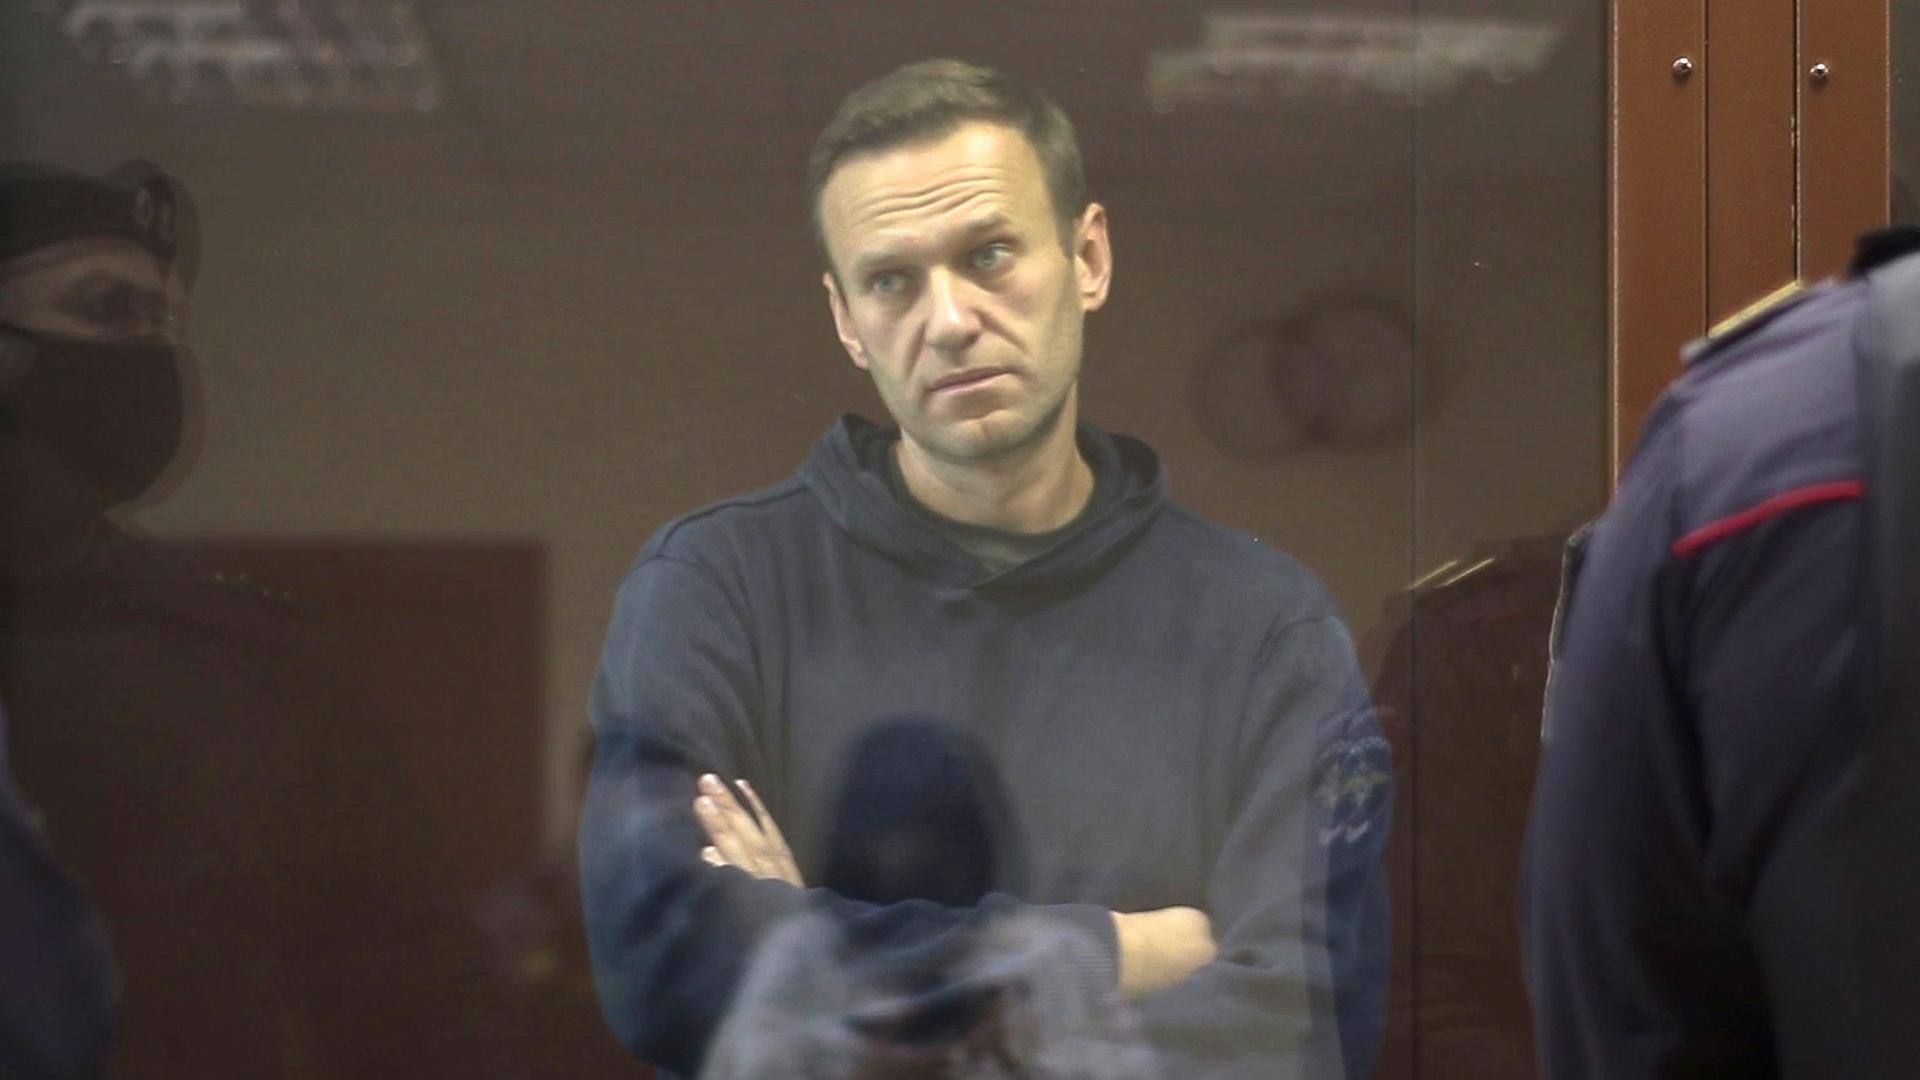 Alexei Navalny is shown wearing a blue hooded sweatshirt and standing with his arms folded in a glass cage in a Russian courtroom.